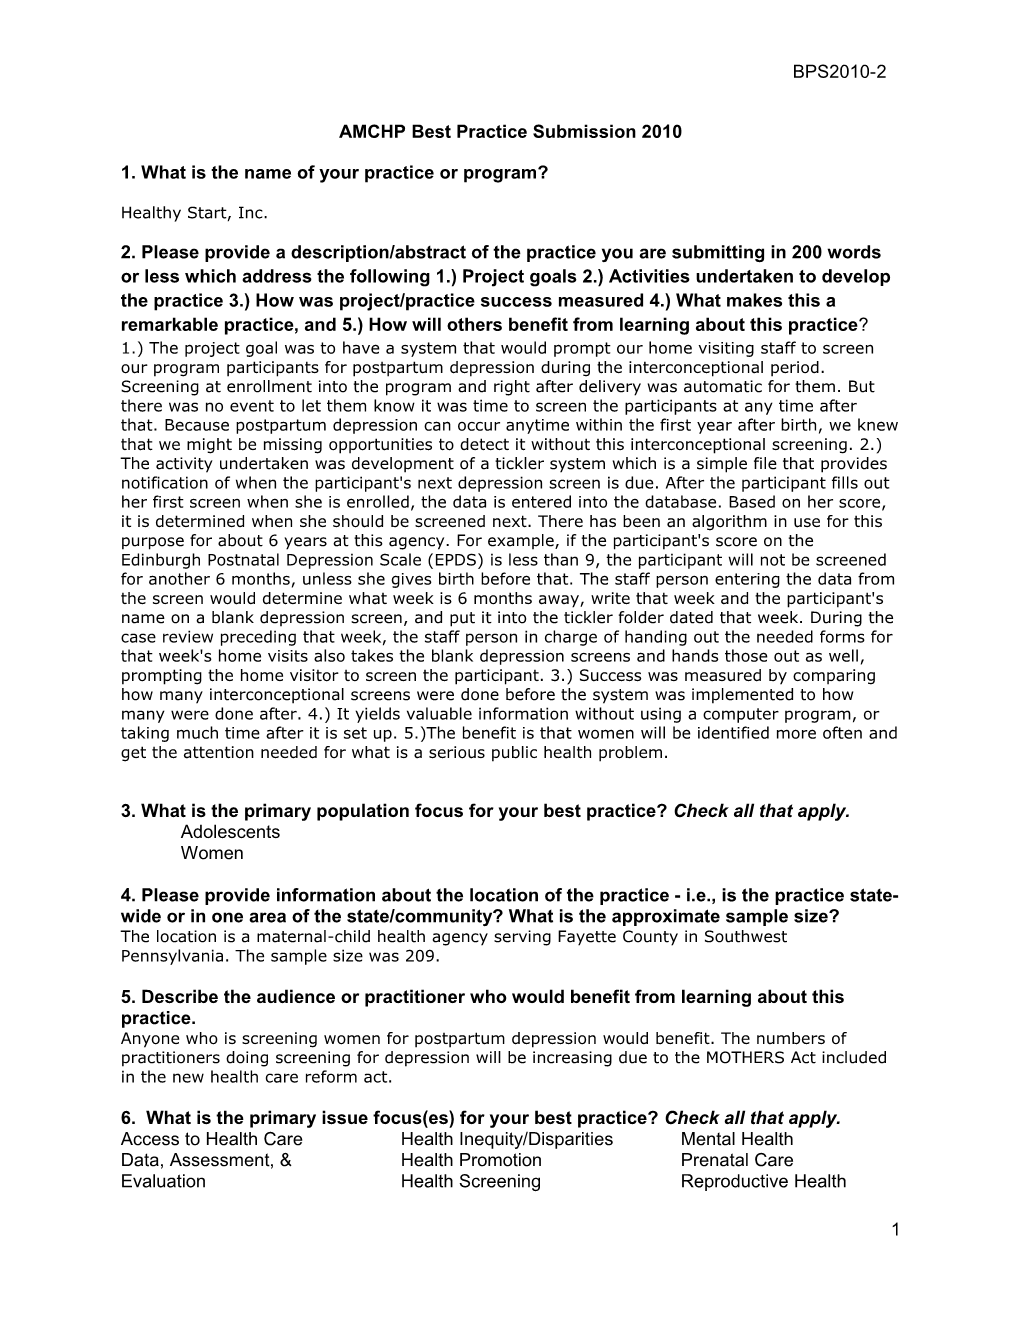 AMCHP Best Practice Submission 2010